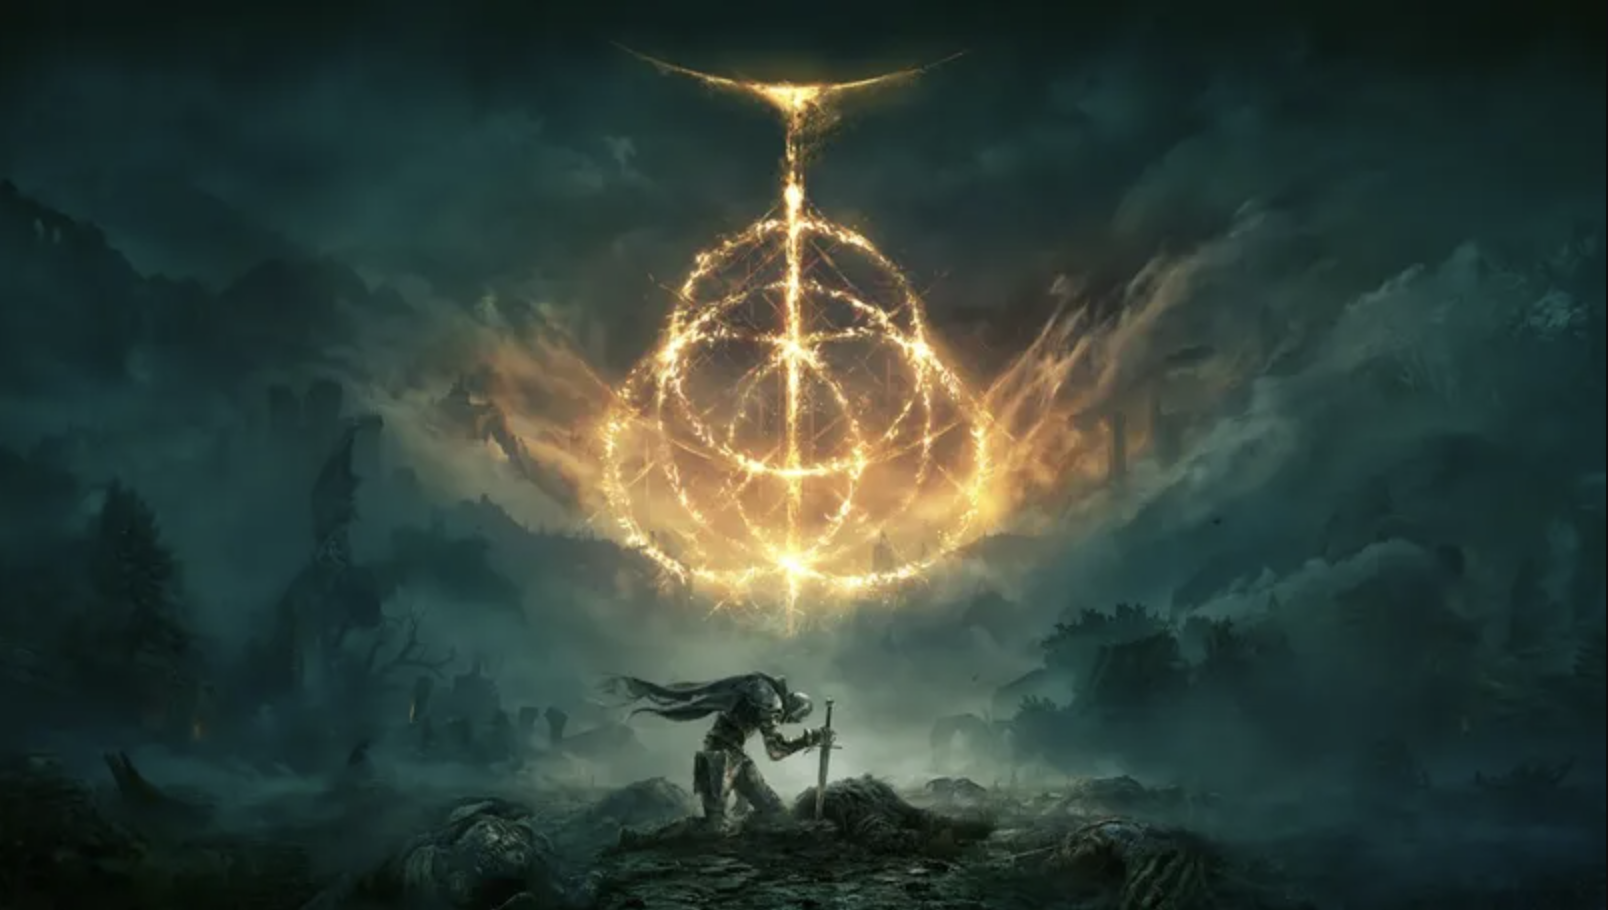 Elden Ring Epic Video Game Music by a Composer Playing Too Much